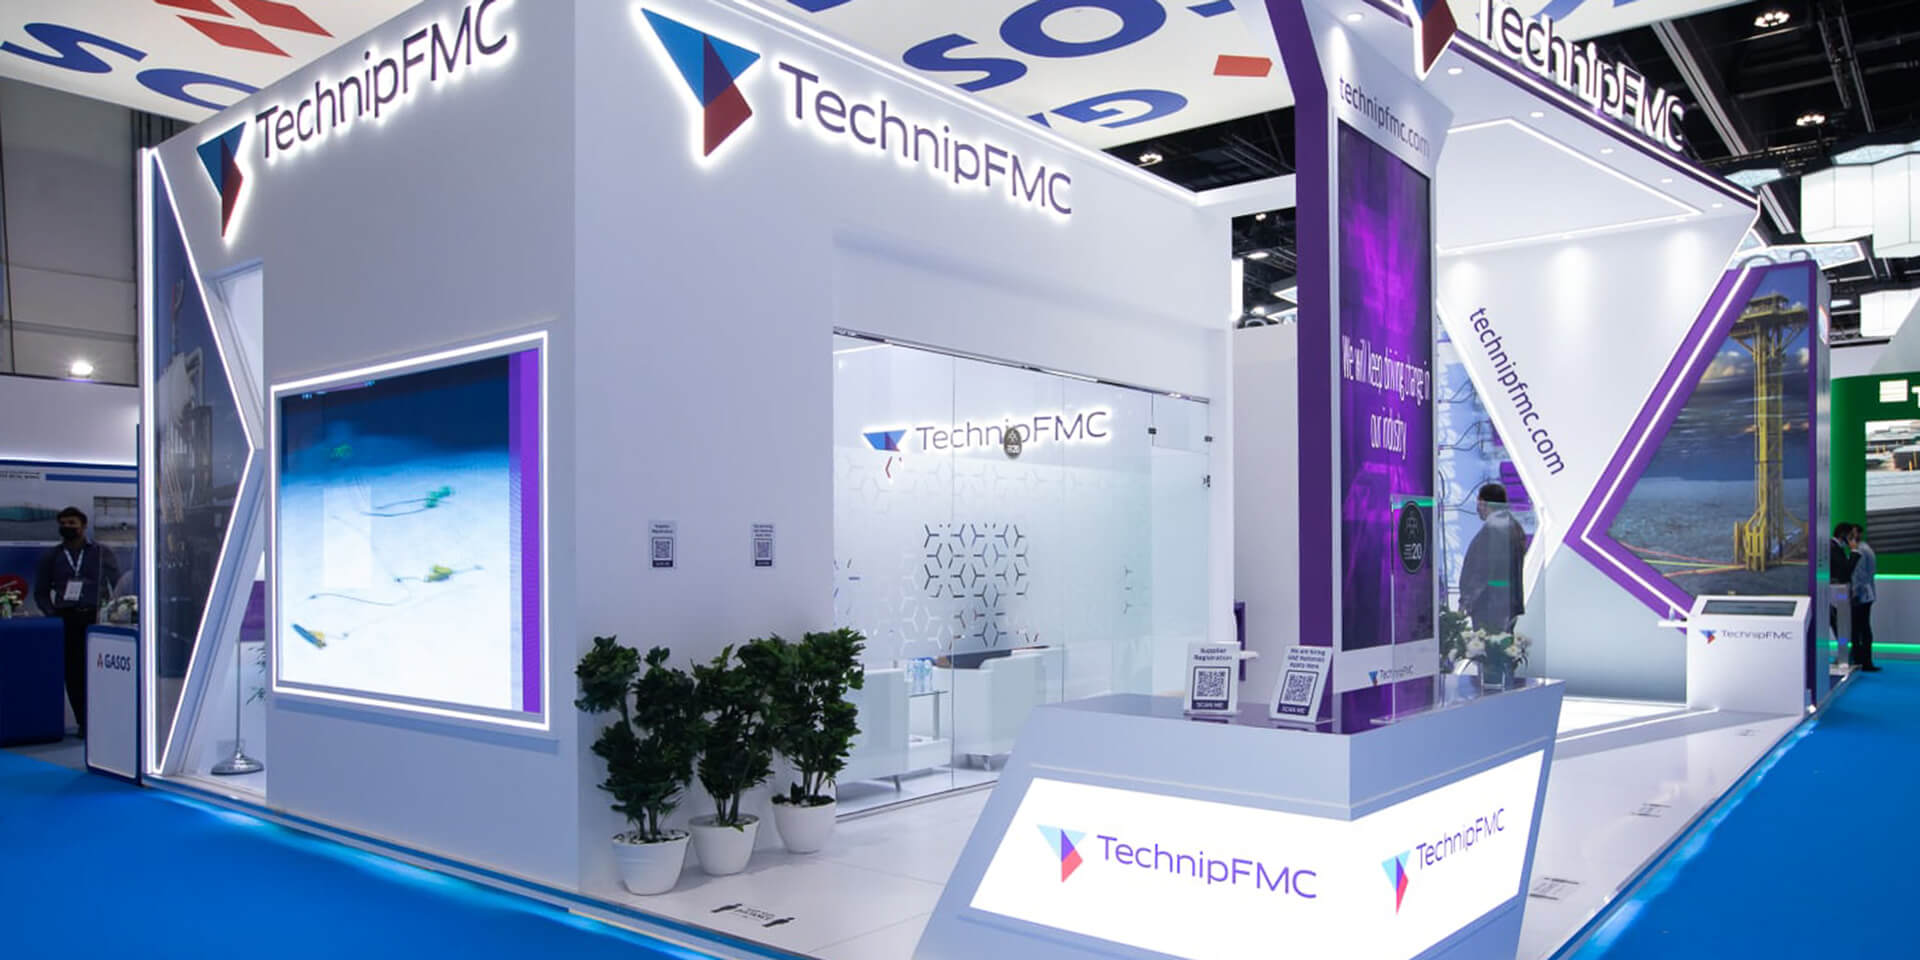 the TechnipFMC stand in a trade show developed for TechnipFMC